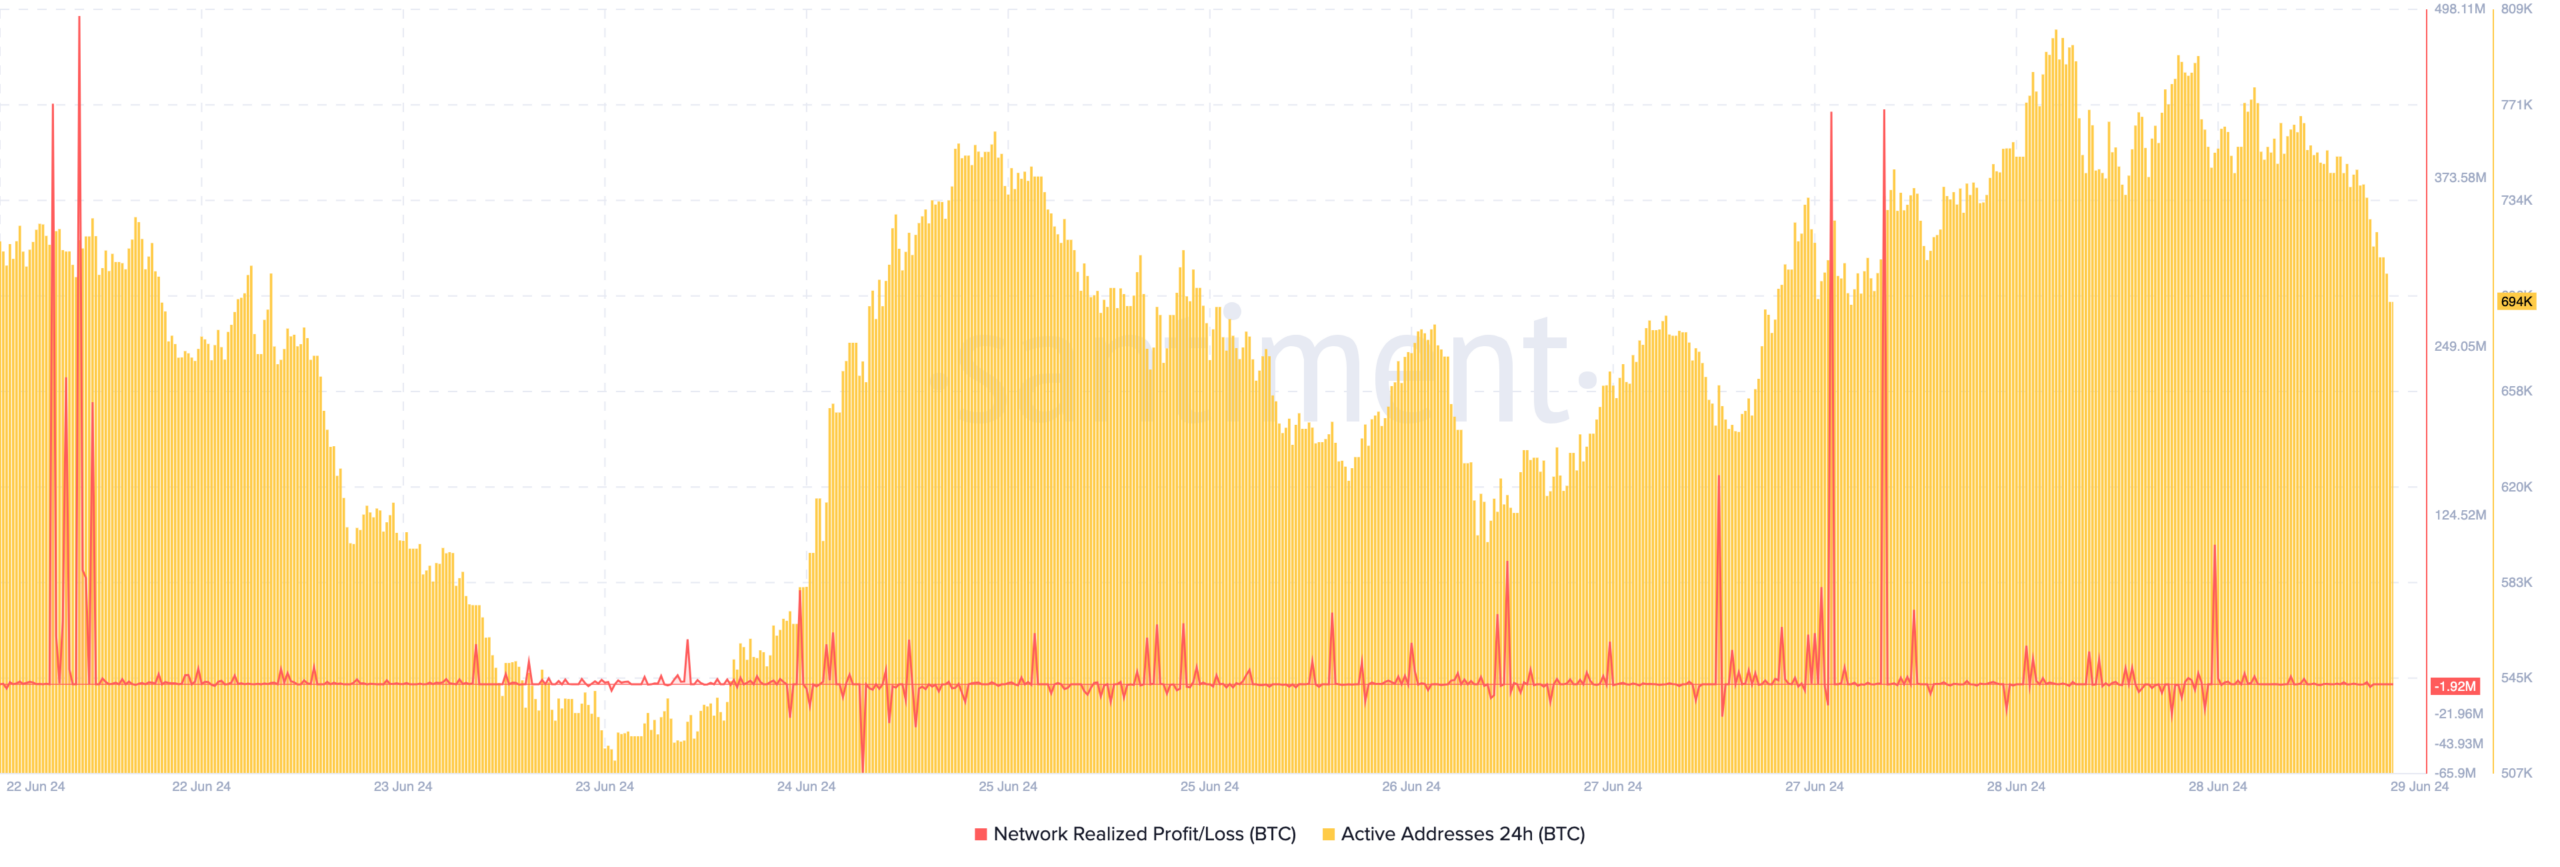 Bitcoin network activity is low